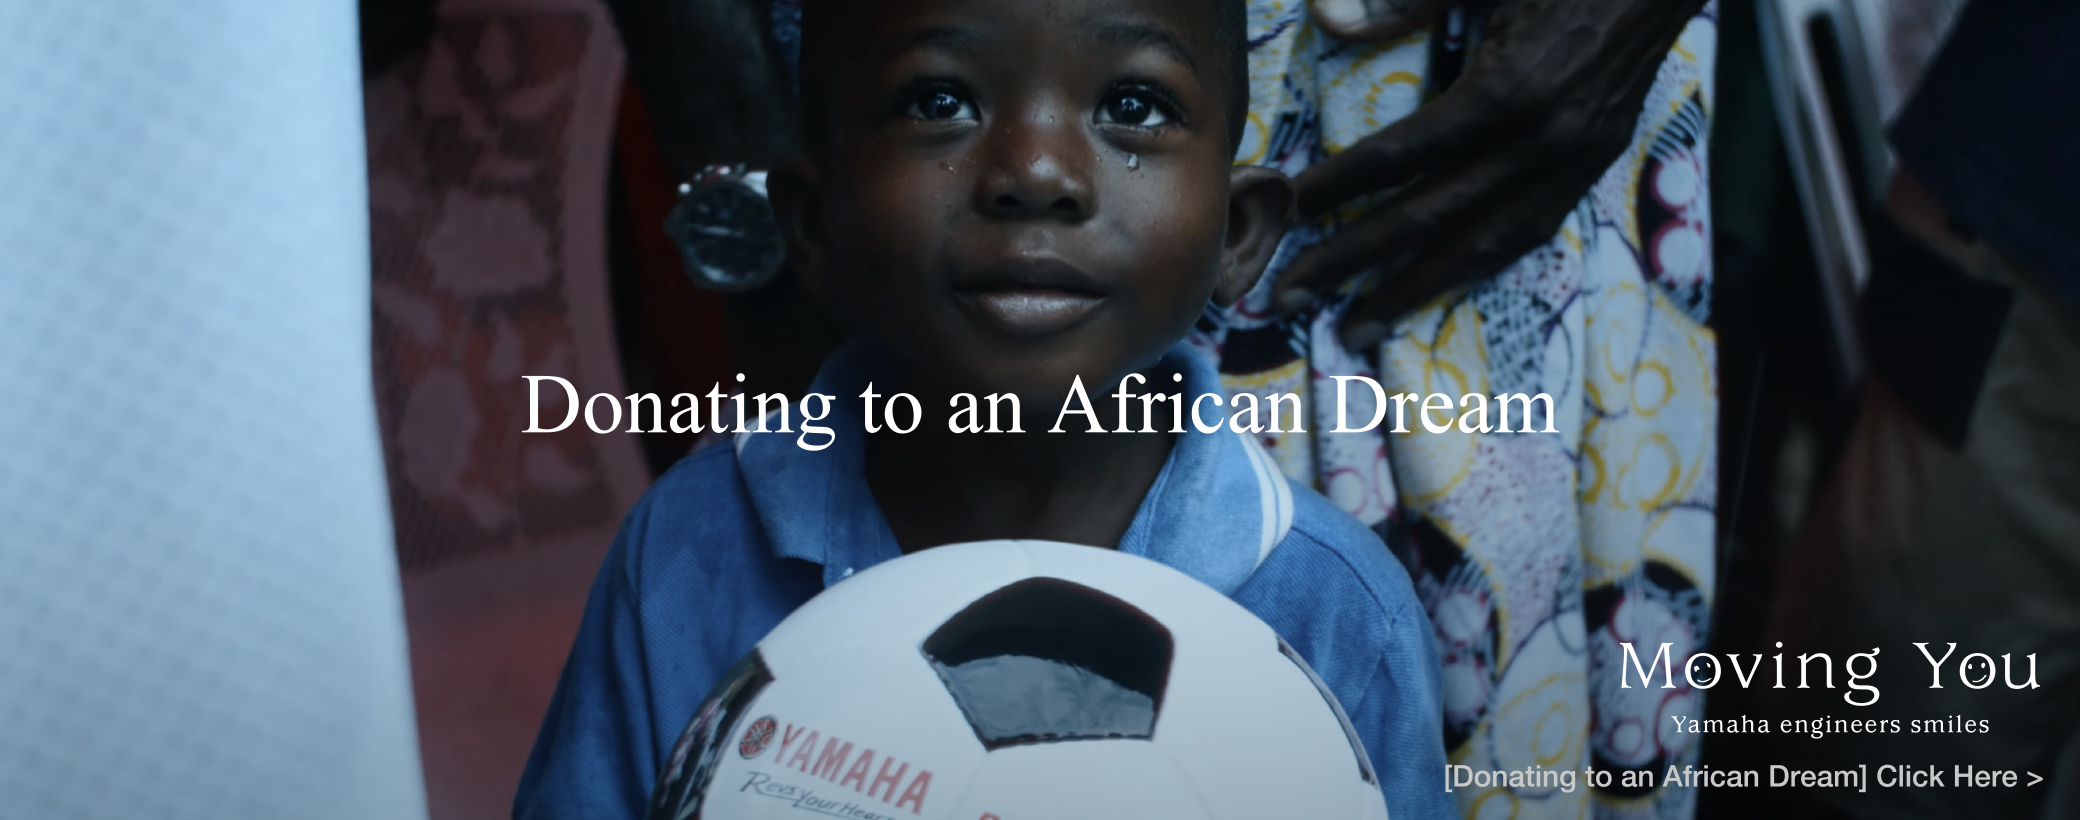 Moving You [Donating to an African Dream]